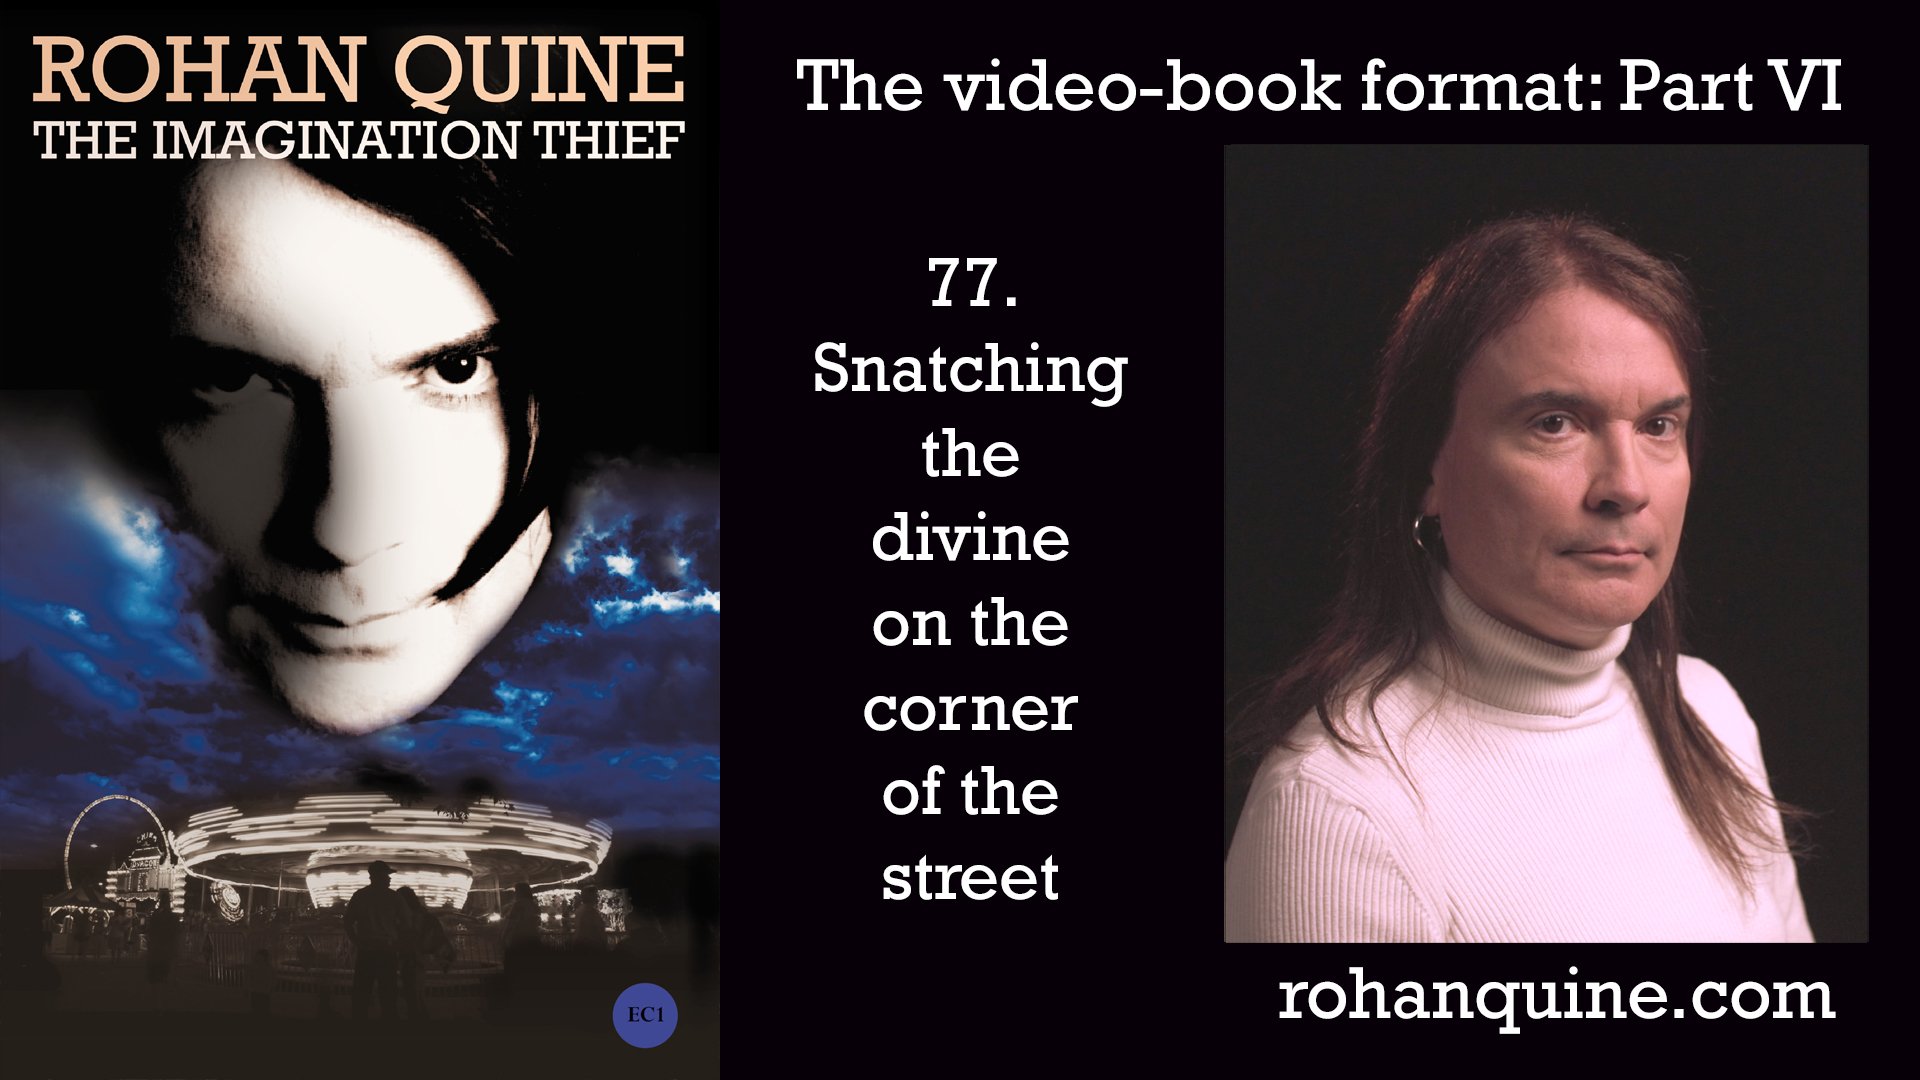 THE IMAGINATION THIEF by Rohan Quine - video-book format - mini-chapter 77